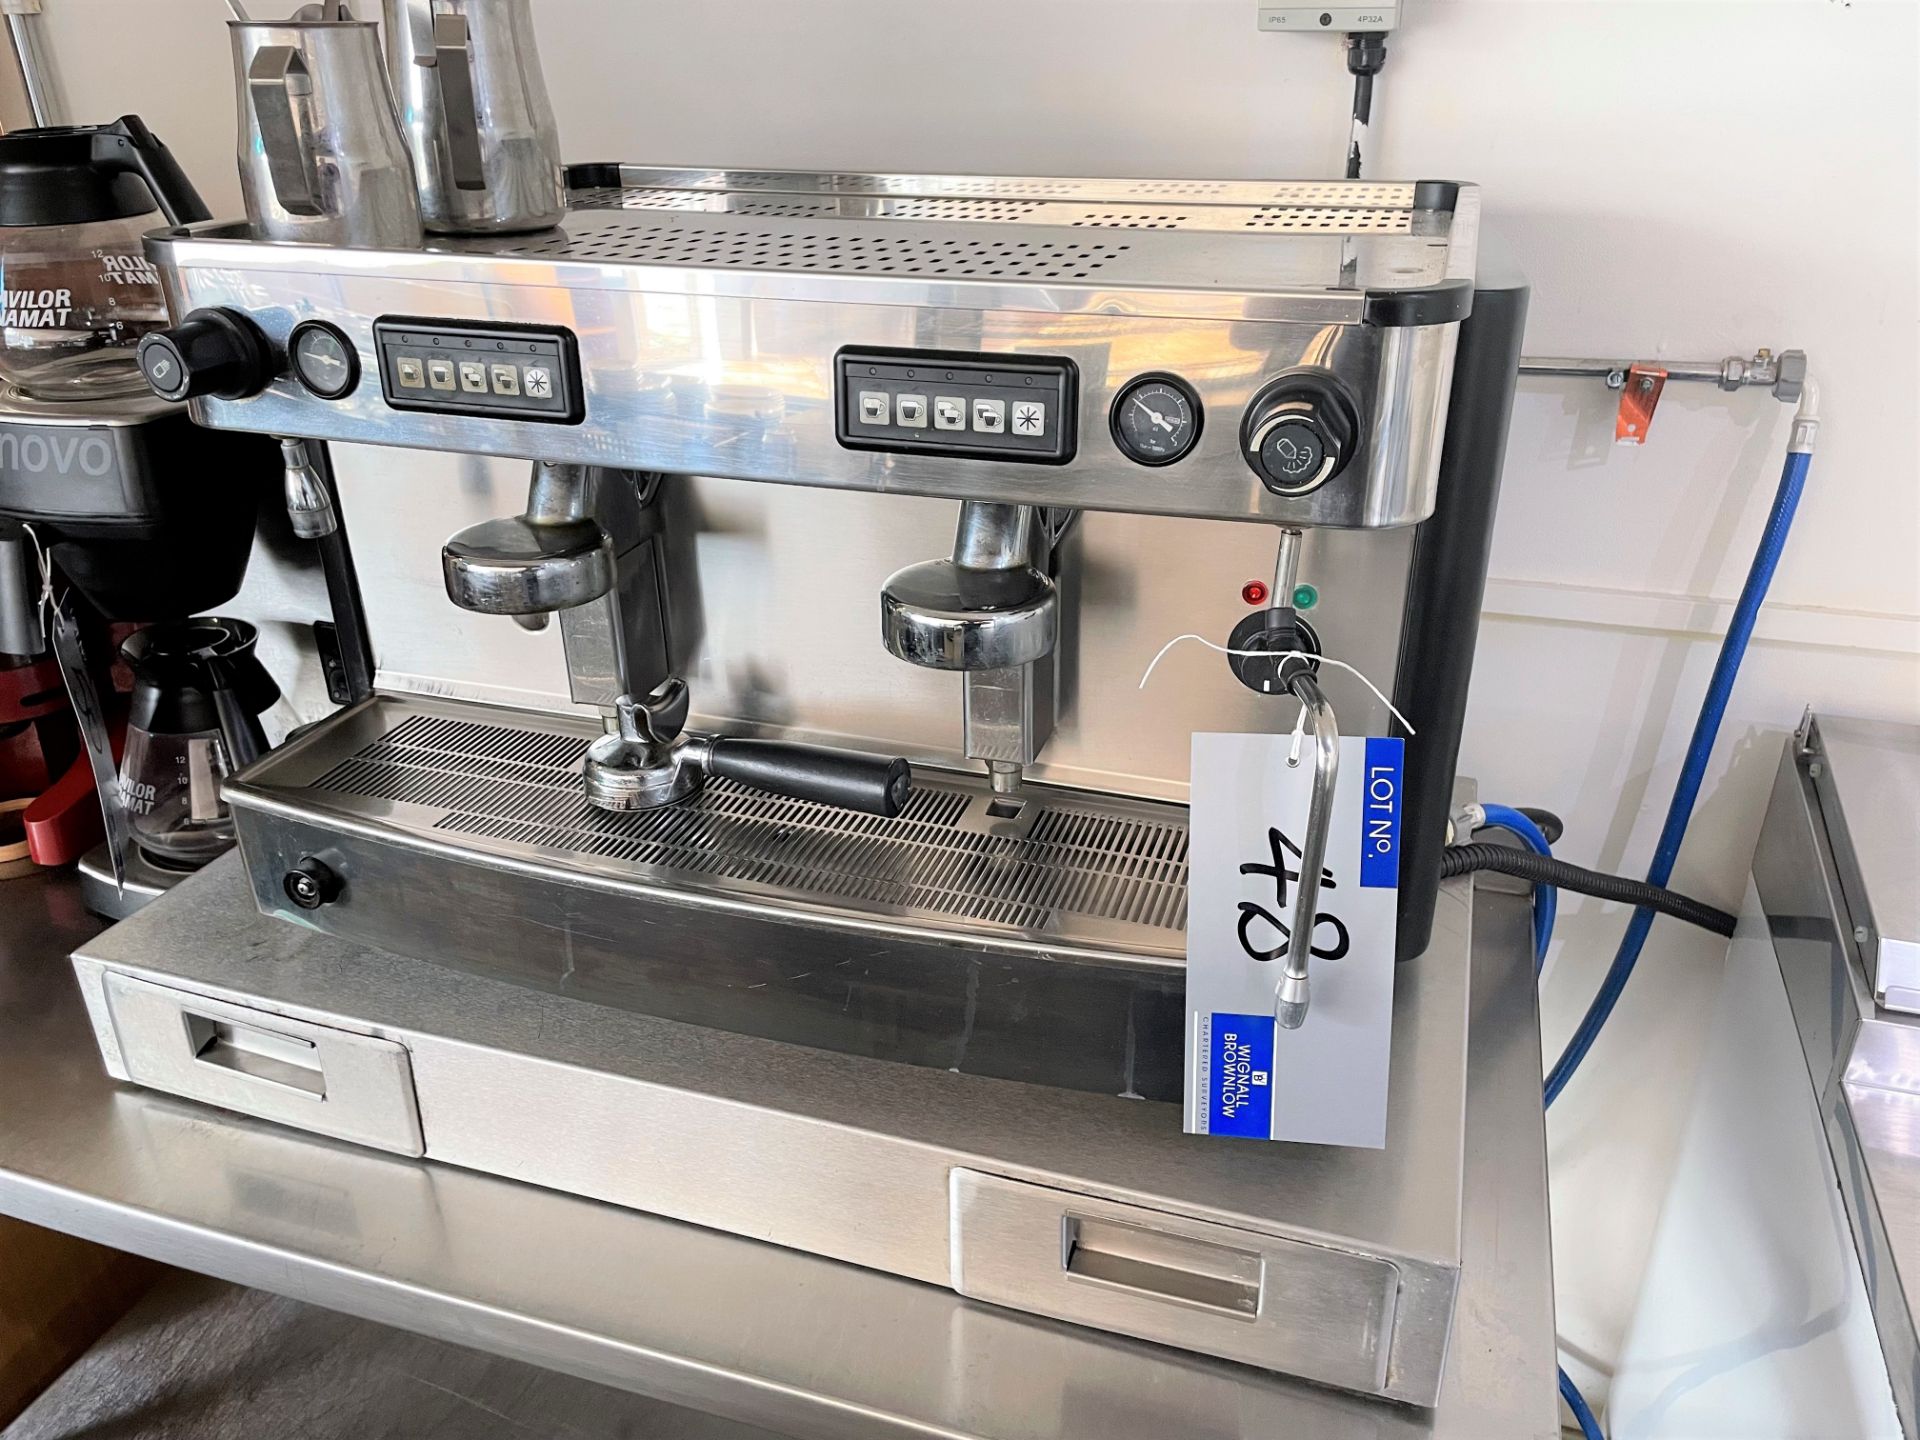 An Iberital Expression 2 head Commercial Coffee Machine No.A16727 with Stainless Steel Stand,